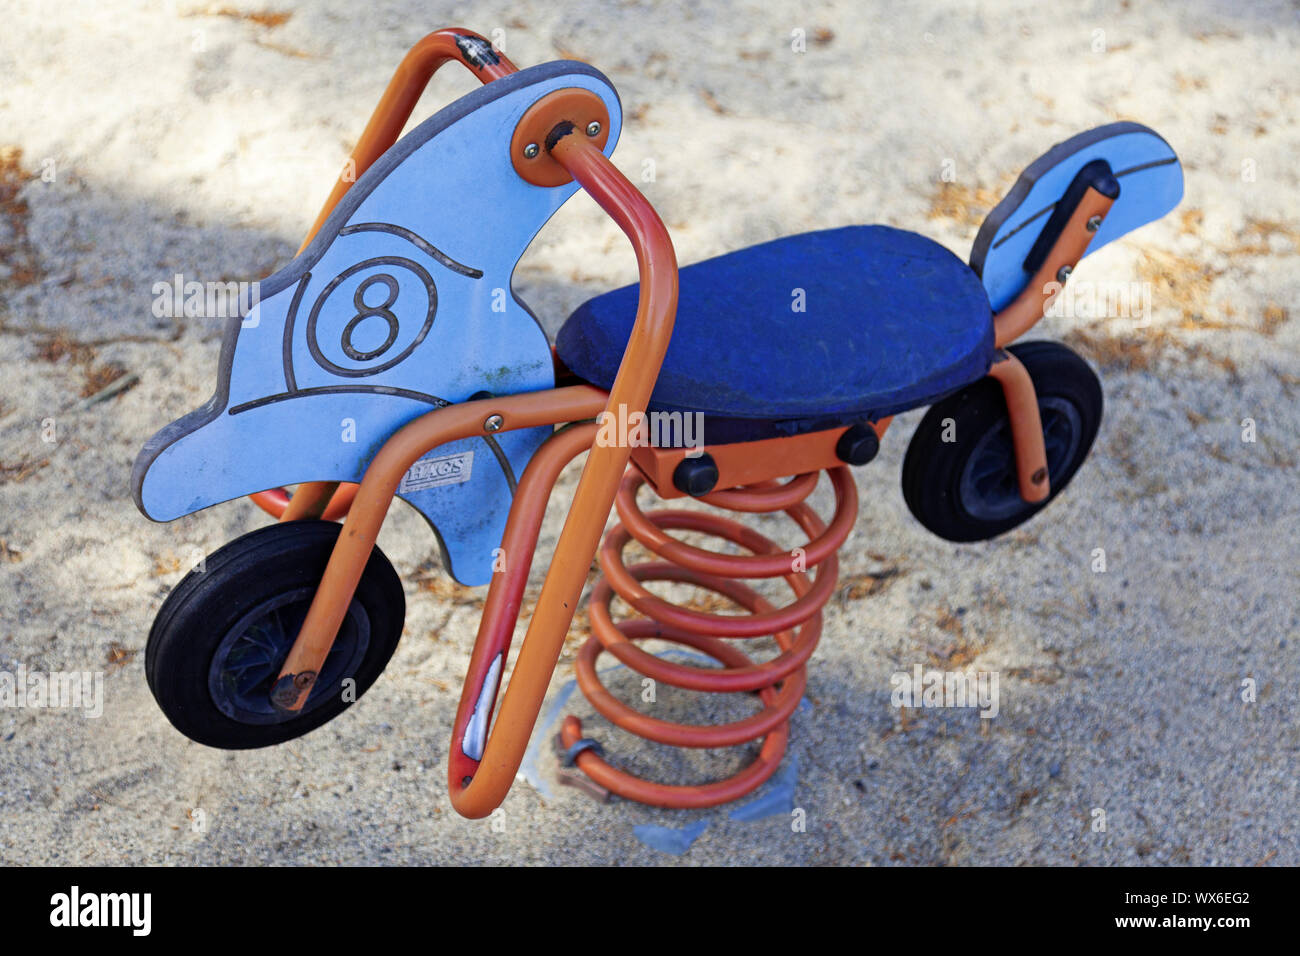 Umea, Sweden - August 14, 2019: toy motorcycle in playground with sand Stock Photo